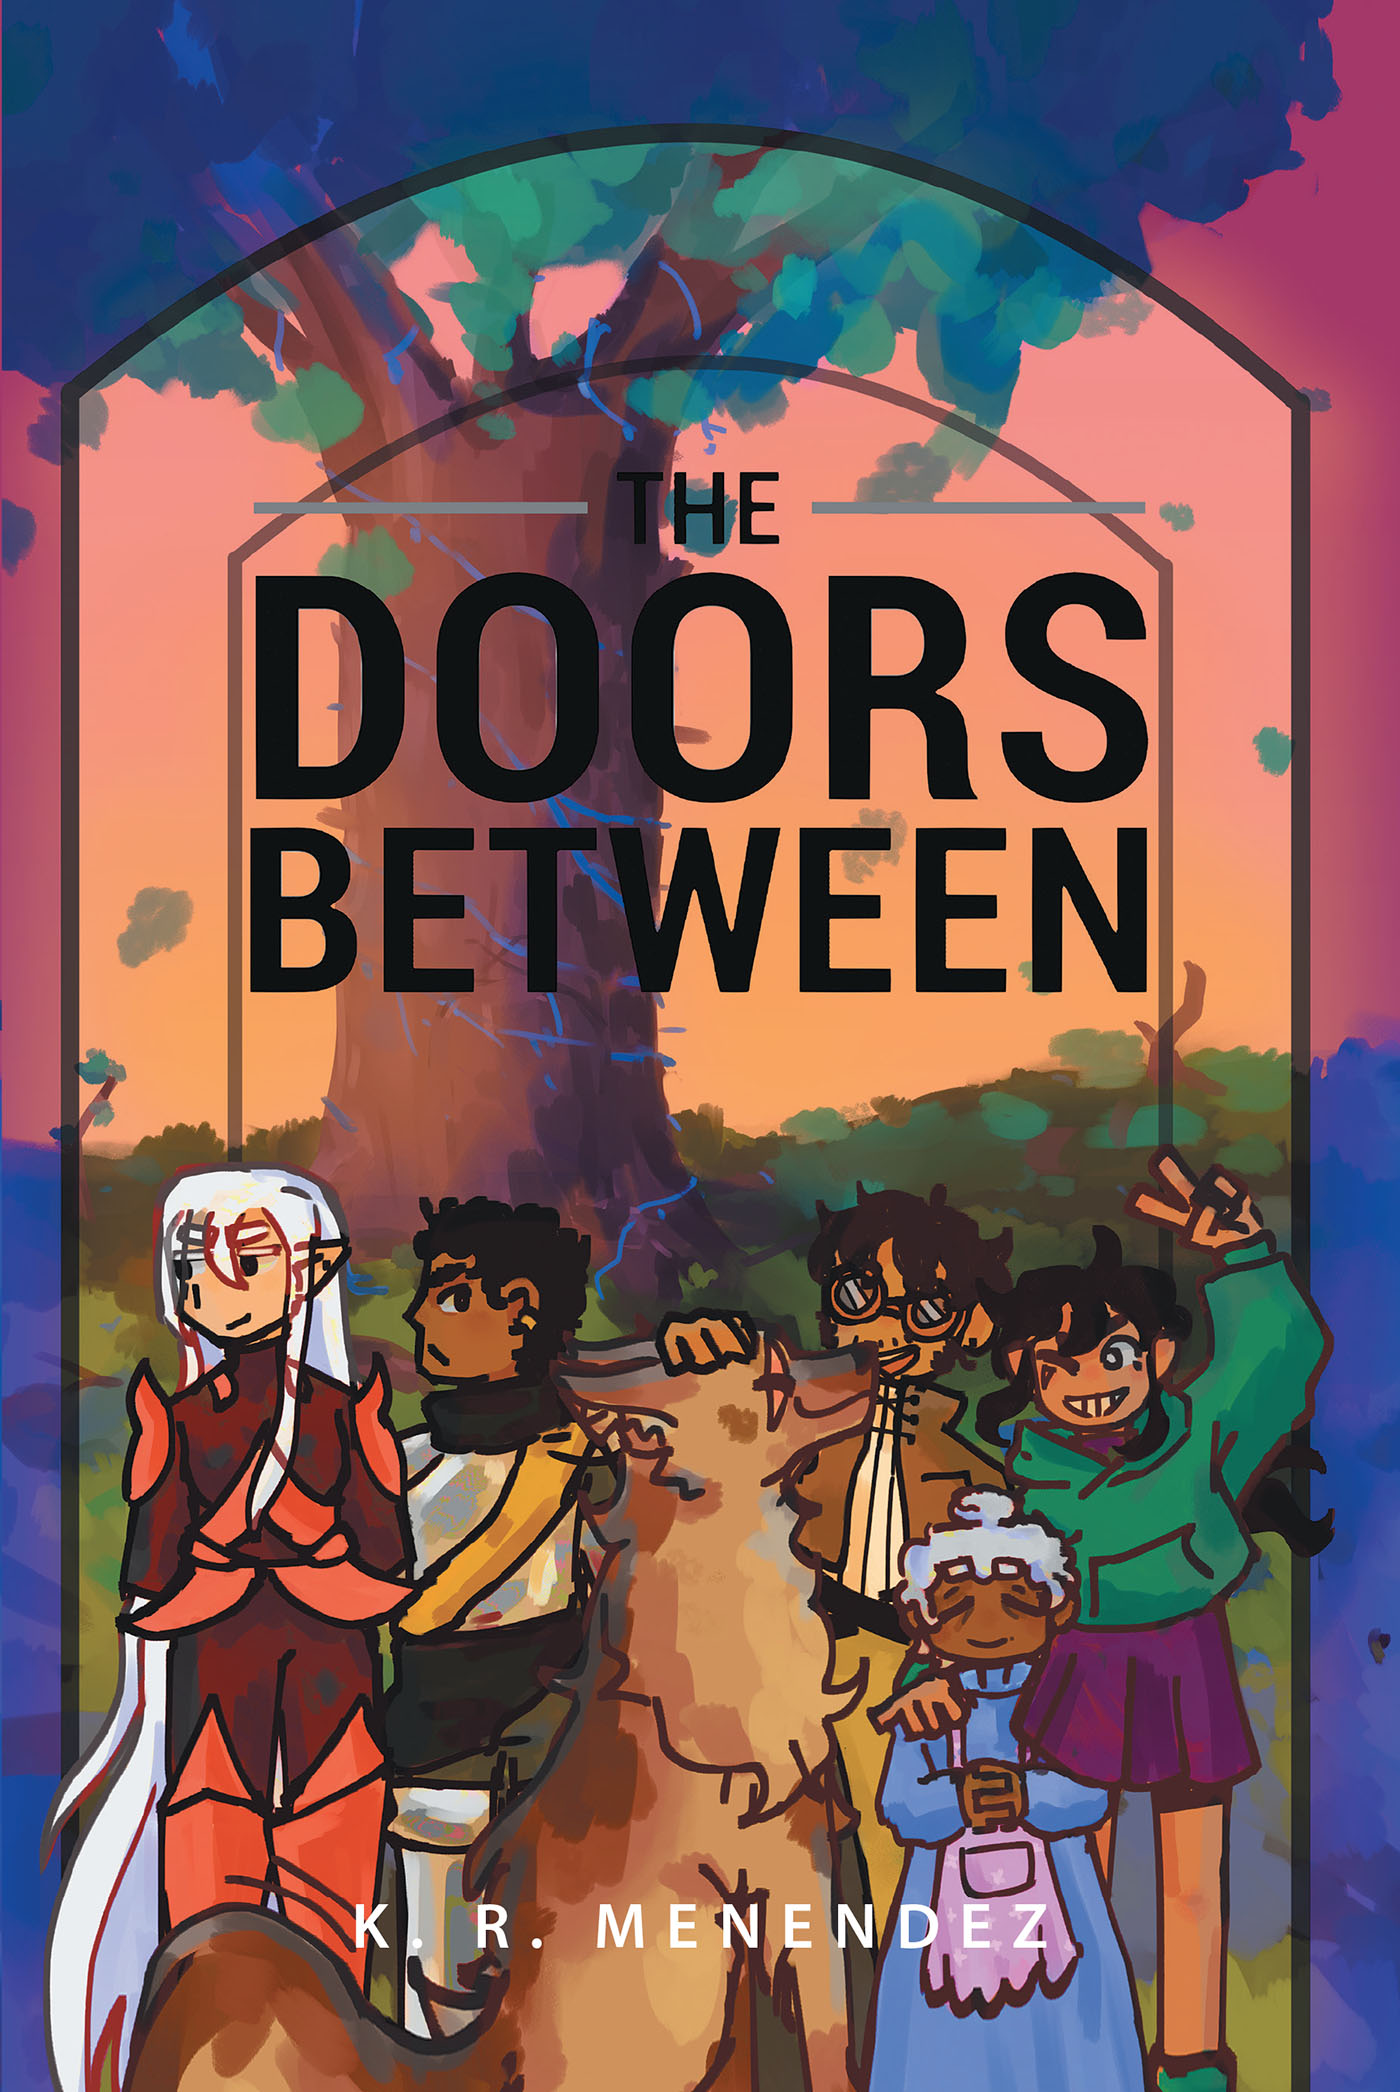 Author K. R. Menendez’s New Book, "The Doors Between," Explores How One’s Life Can be Forever Changed in an Instant When a Trash Junker Makes a Remarkable Discovery